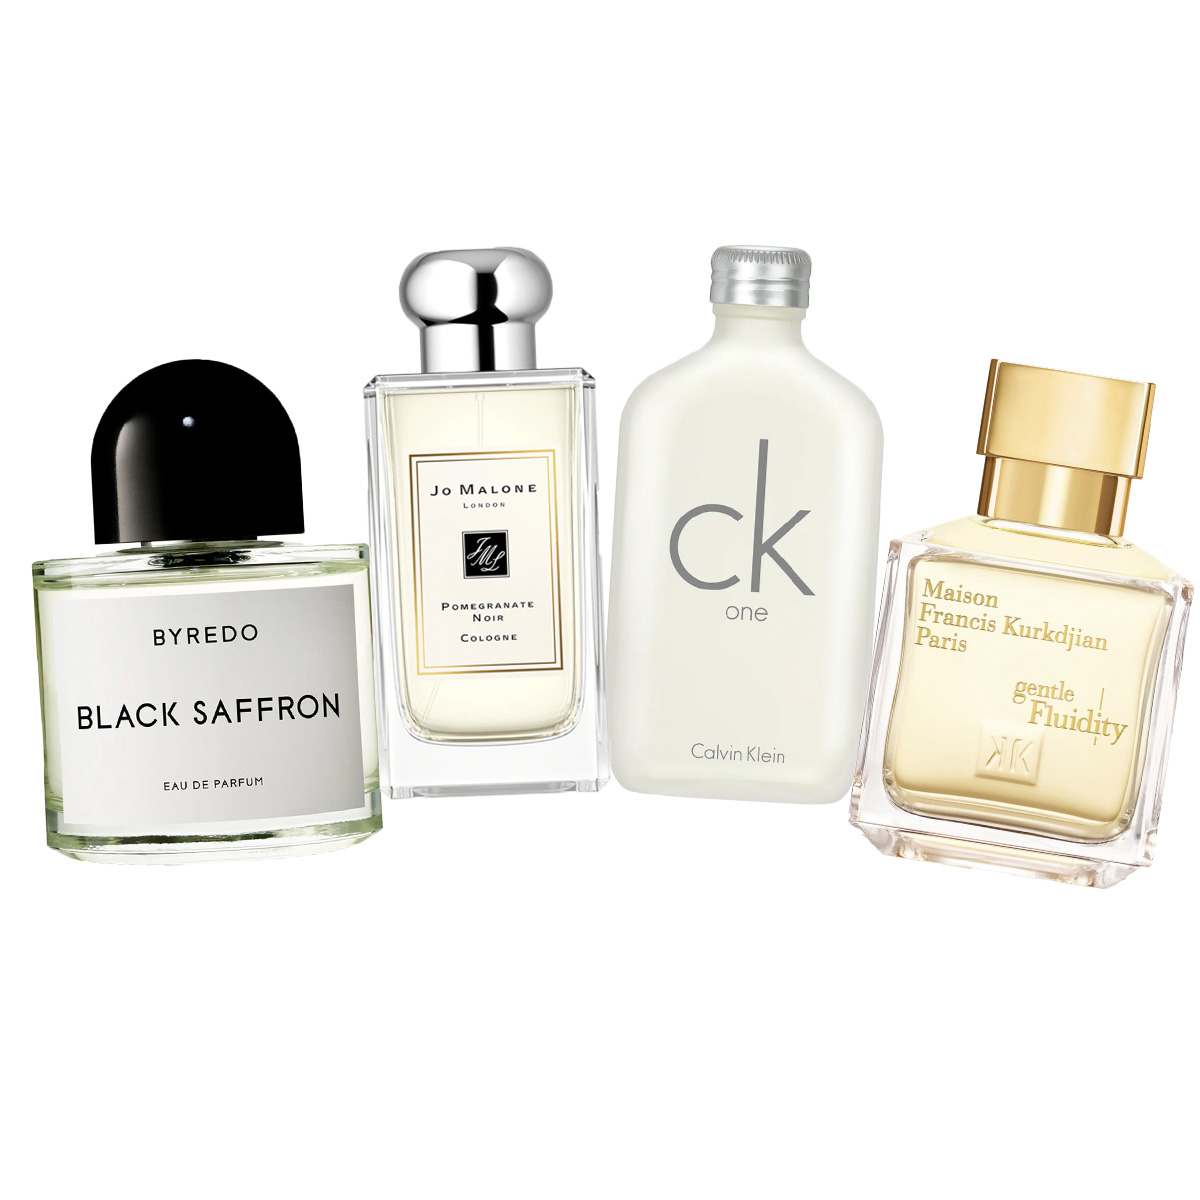 12 Gender-Neutral Scents That Will Get You Tons of Compliments - E! Online